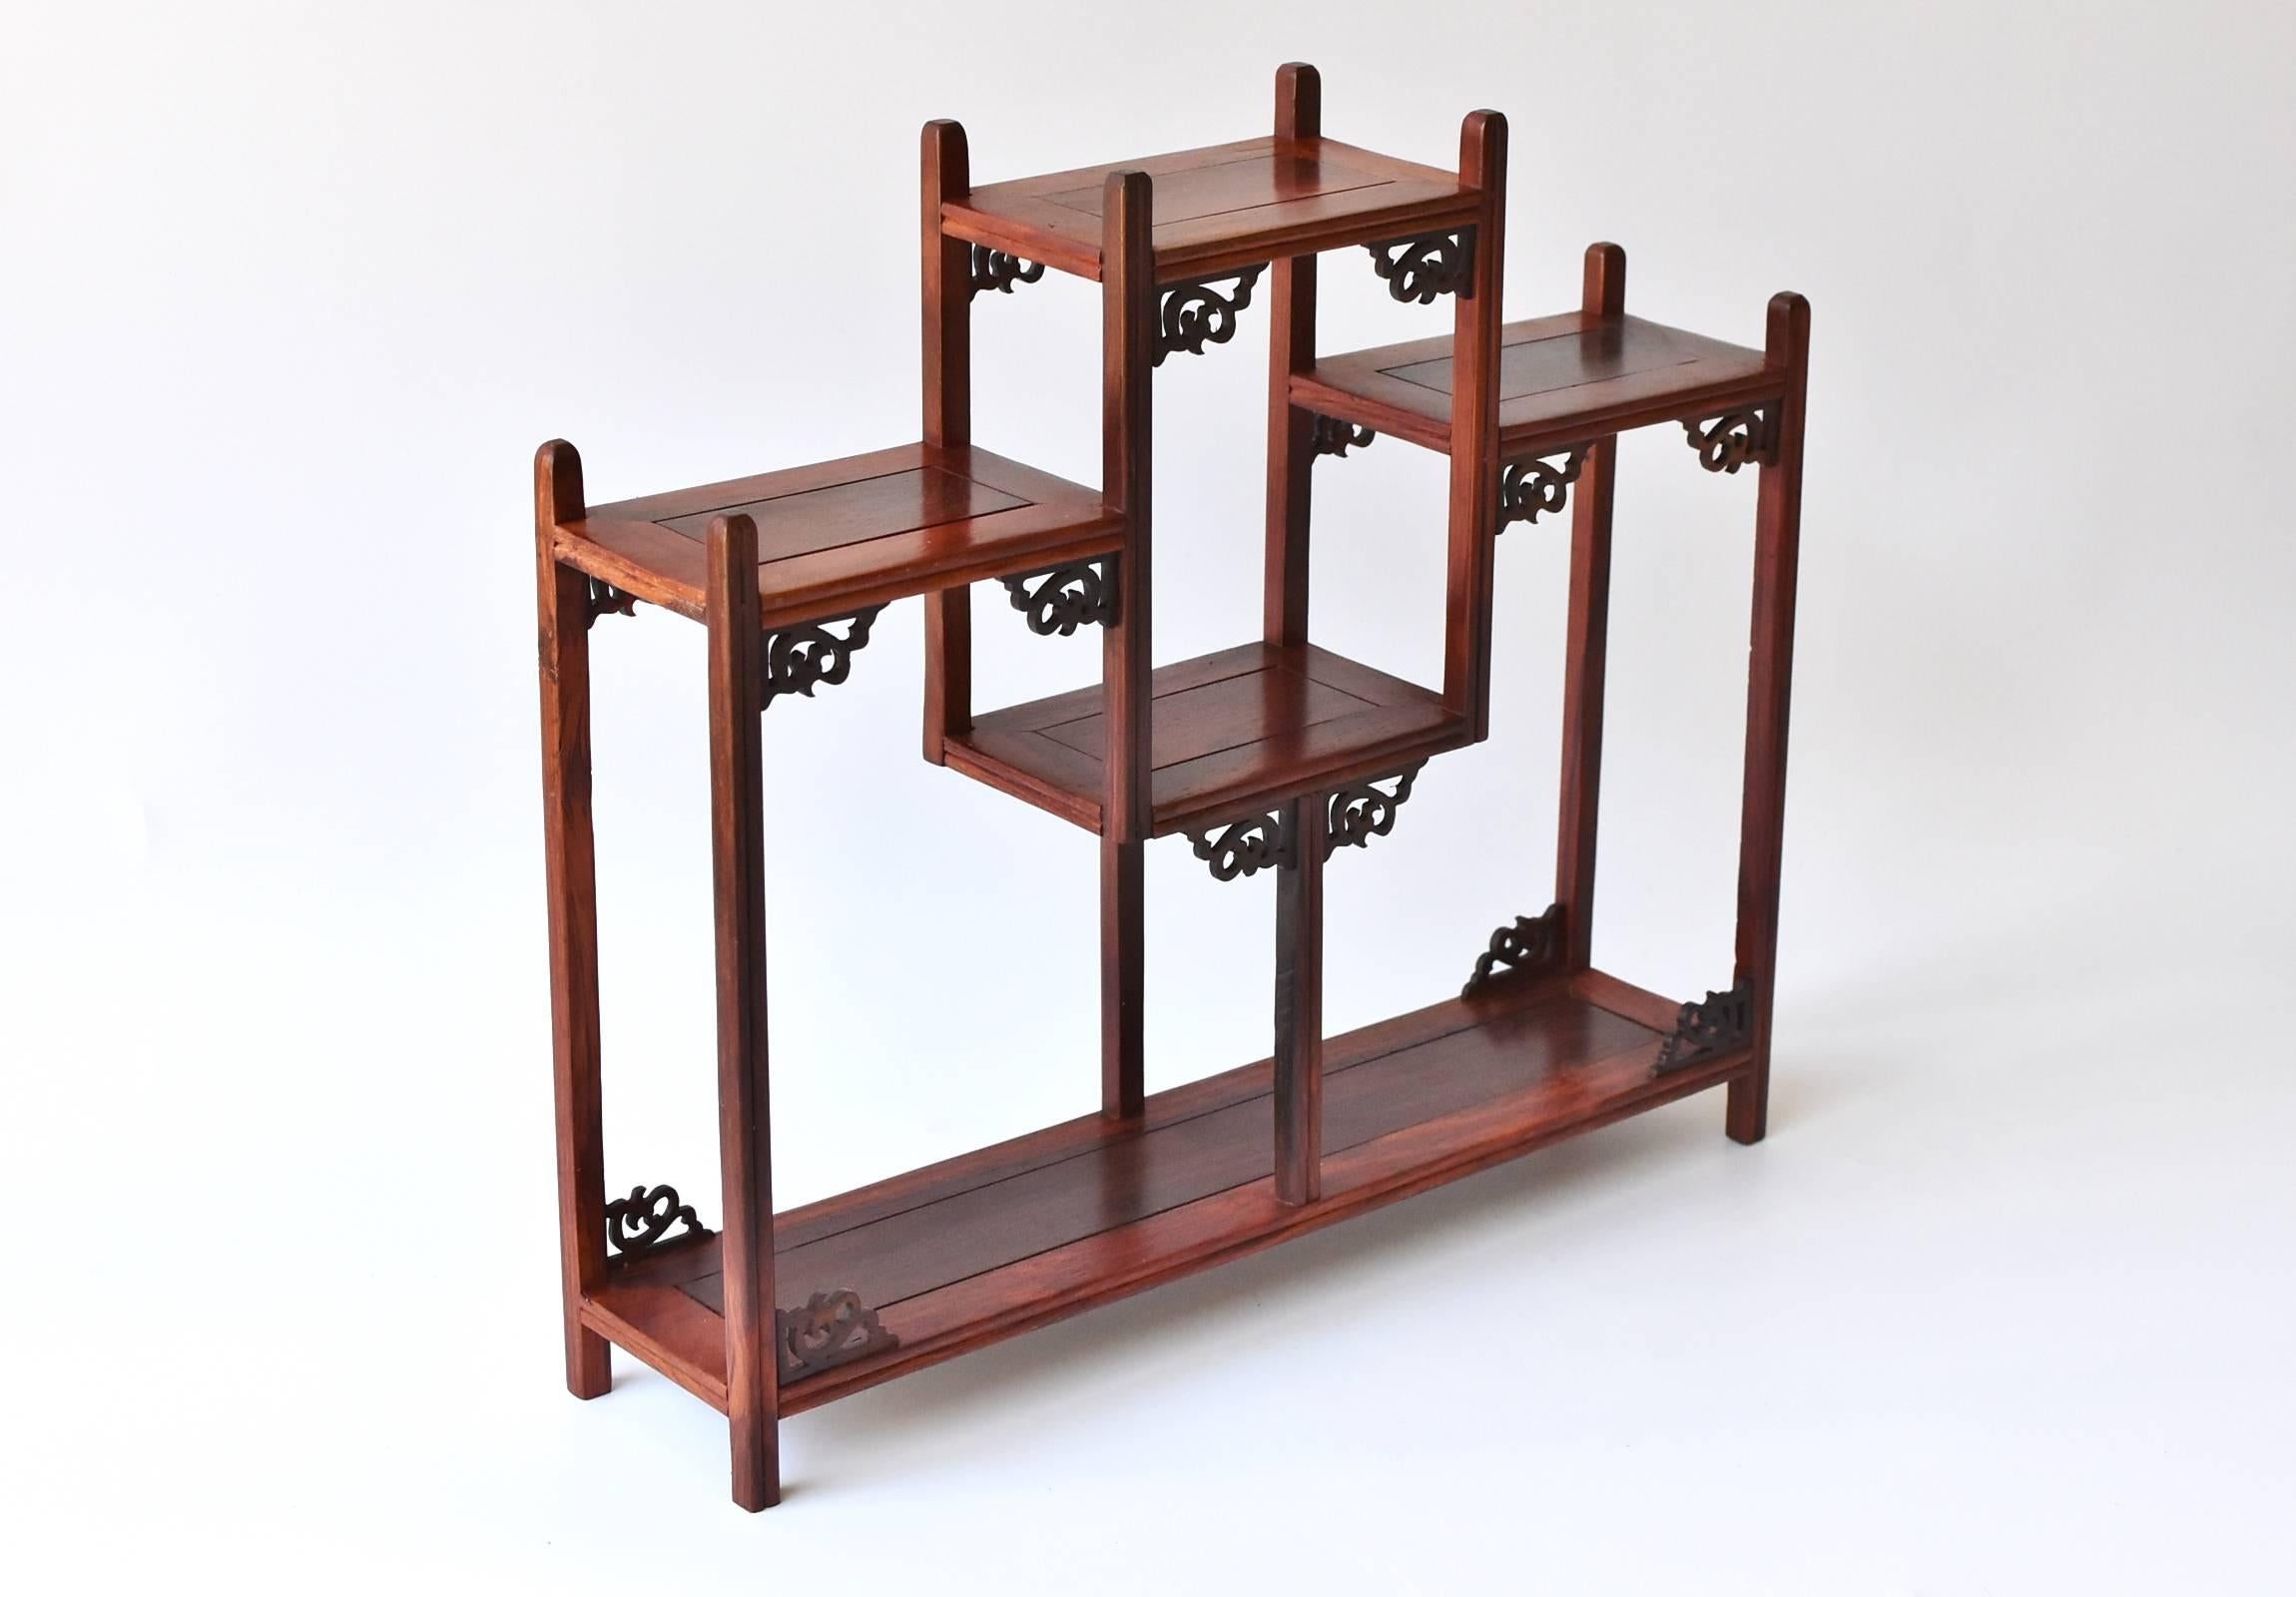 A beautiful mini display case made of Chinese Hua Li wood. 

This exquisite piece features six shelves for displaying small items such as jade carvings and snuff bottles. Nice delicate carved scrolls decorate the corners, adding interest and beauty.